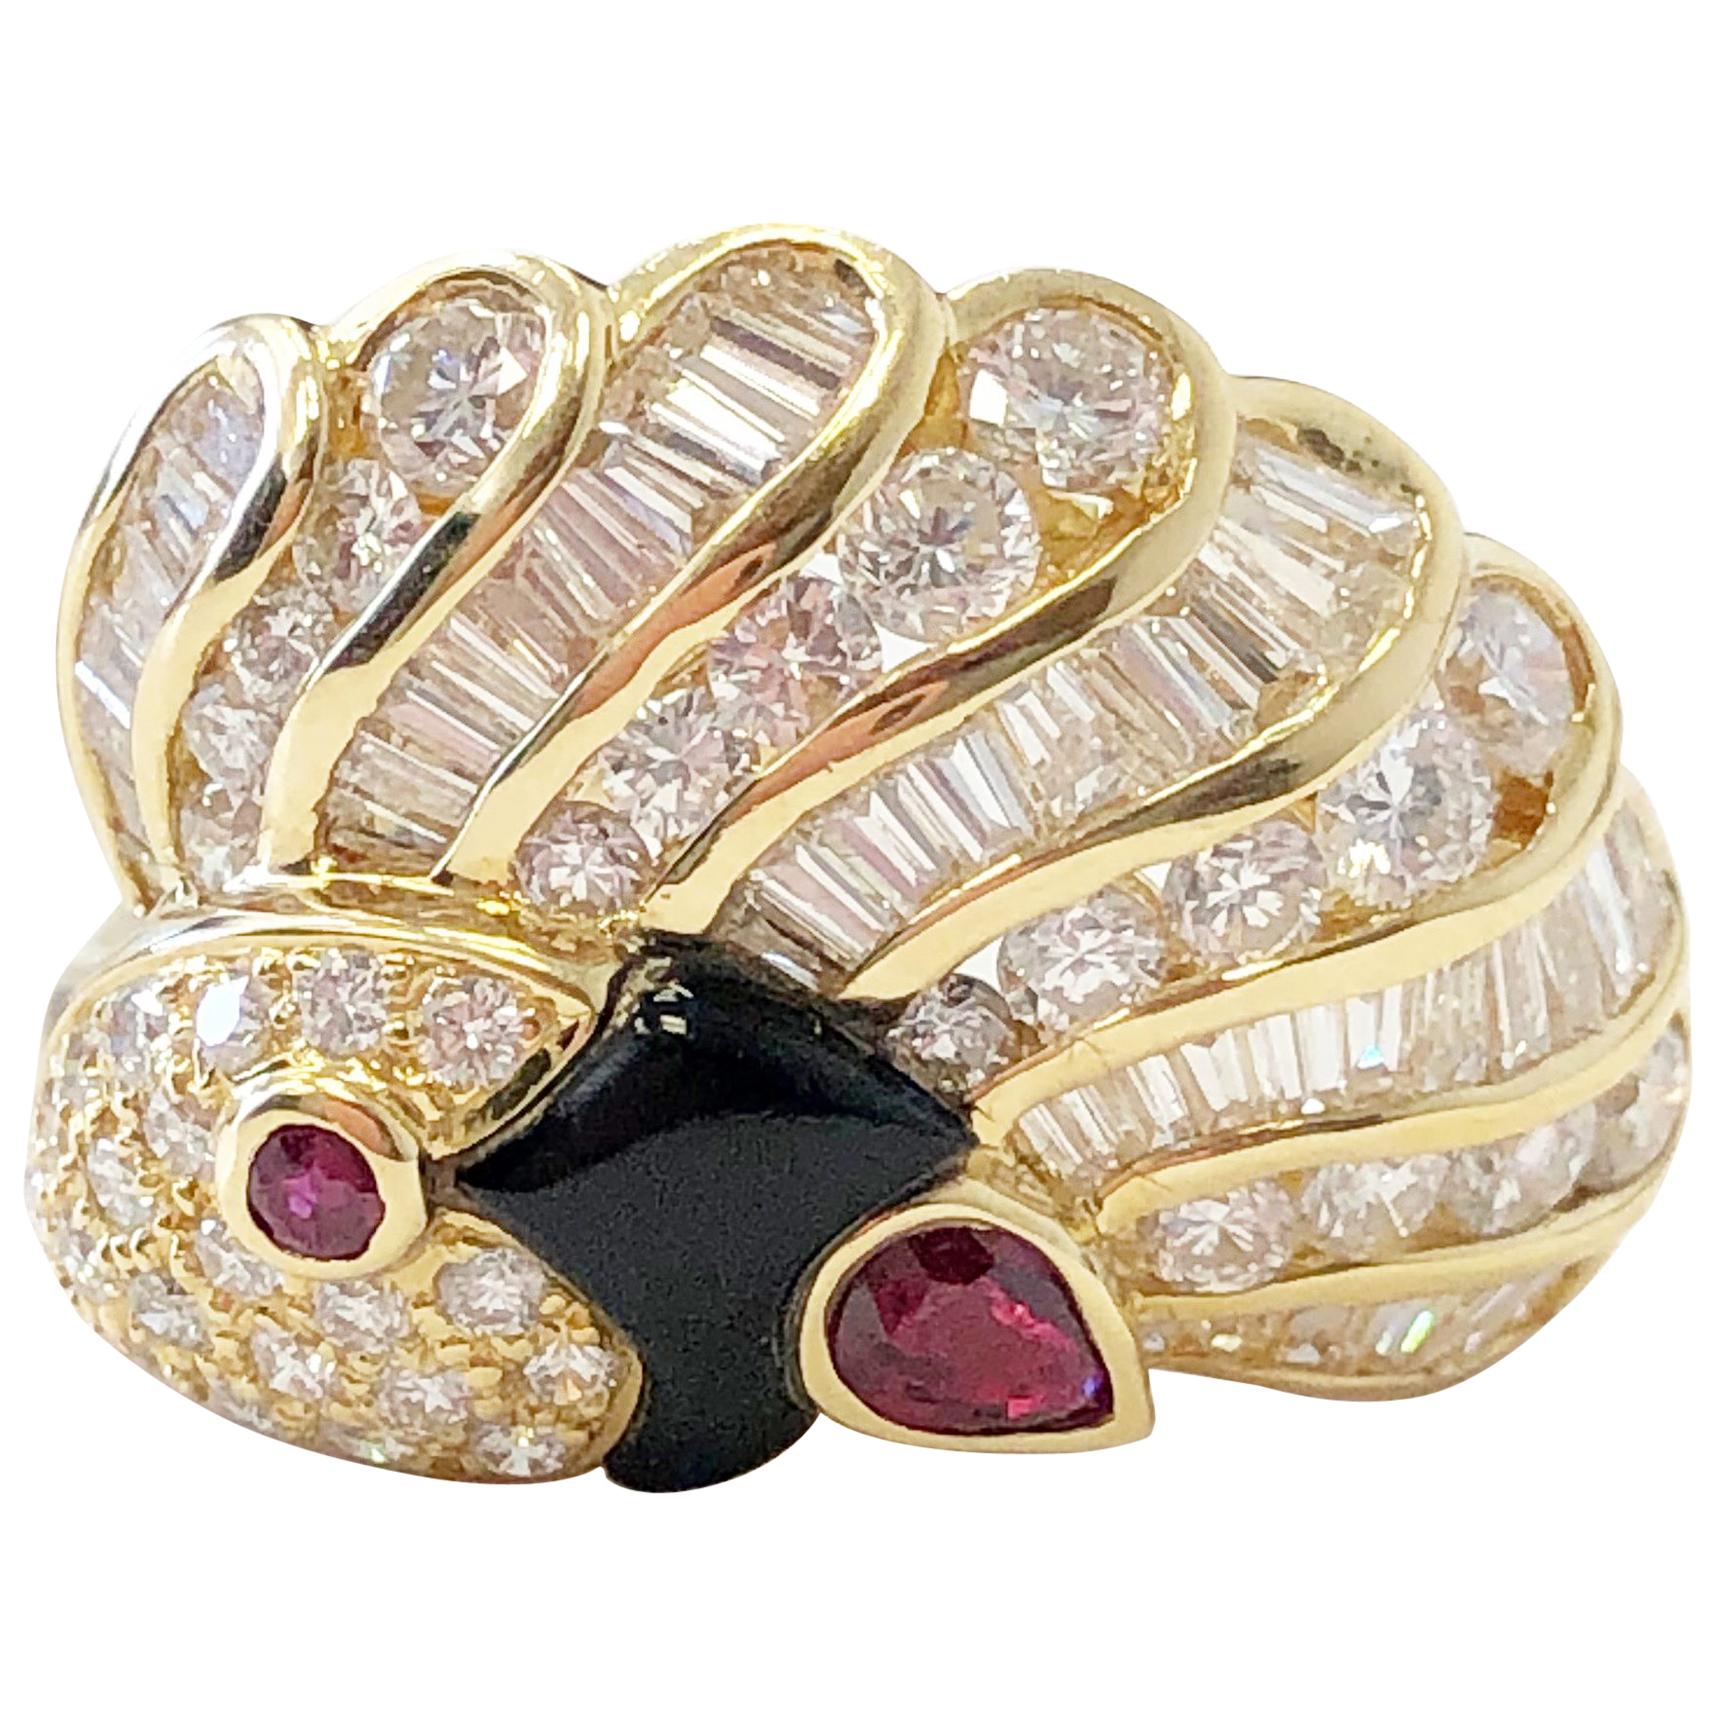 White Diamond and Ruby Peacock Cocktail Ring in 18 Karat Yellow Gold